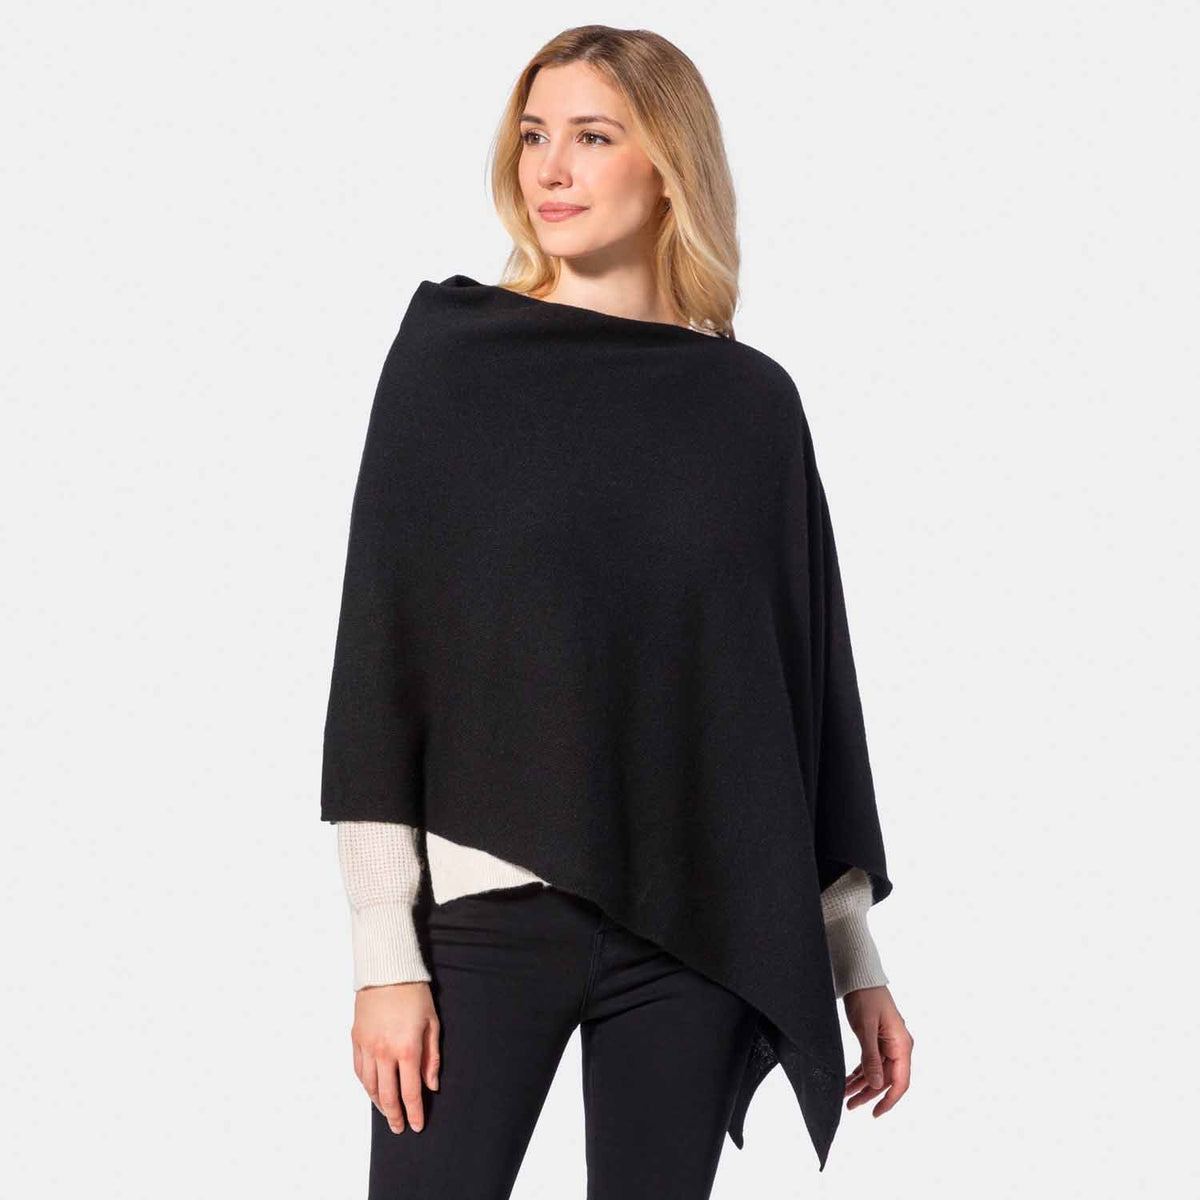 Picture of a woman wearing an asymmetrical ove the head poncho, black.